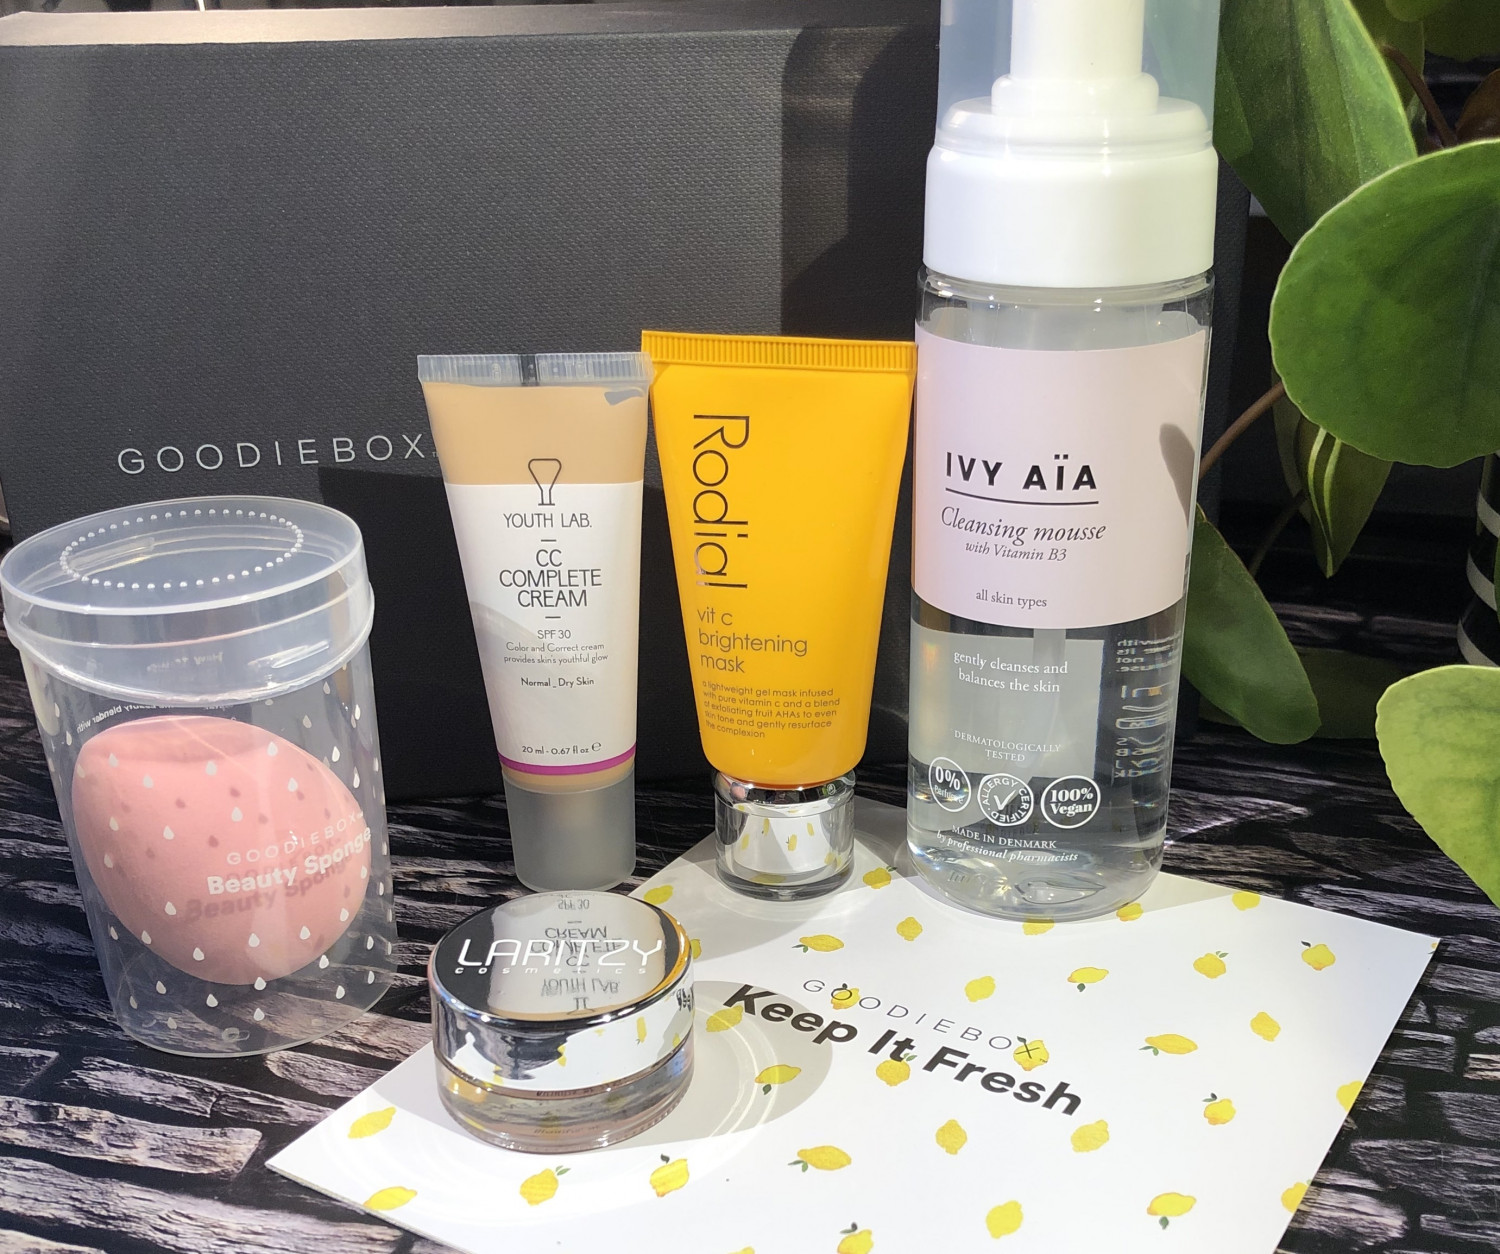 Goodiebox, Goodieboxdk, Goodiebox Danmark, Goodiebox Denmark, Krummes Krumelurer, Krummeskrummelurer, Anmeldelse, Goodiebox Beauty Blender, Youth Lab, CC Complete Cream, Rodial Vit C. Brightening Mask, Ivy Aïa Cleansing Mousse With Vitain B3, Laritzy Cosmetics, Keep It Fresh,